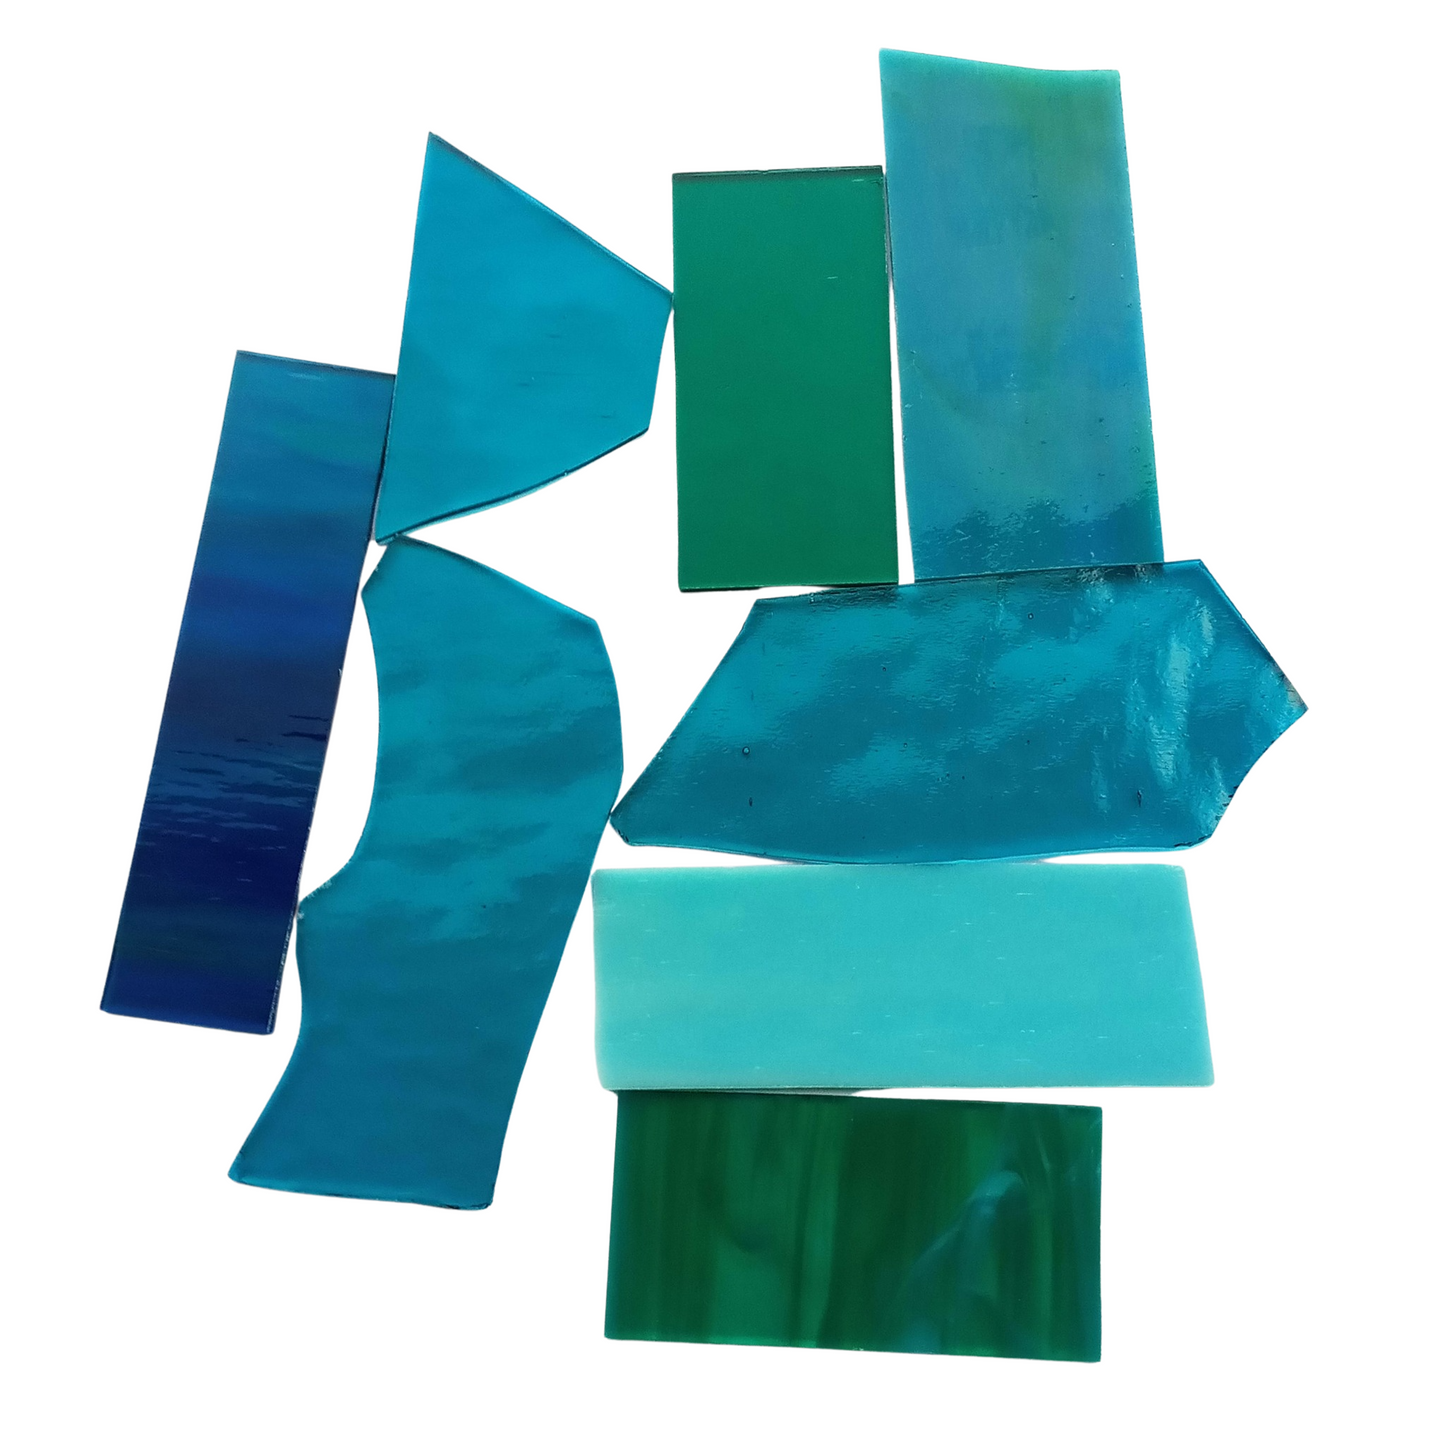 Teal, Aqua Stained Glass Scraps, Curated 1 lb Package of Reclaimed Shop Scrap Glass in Shades of Aqua, Teal